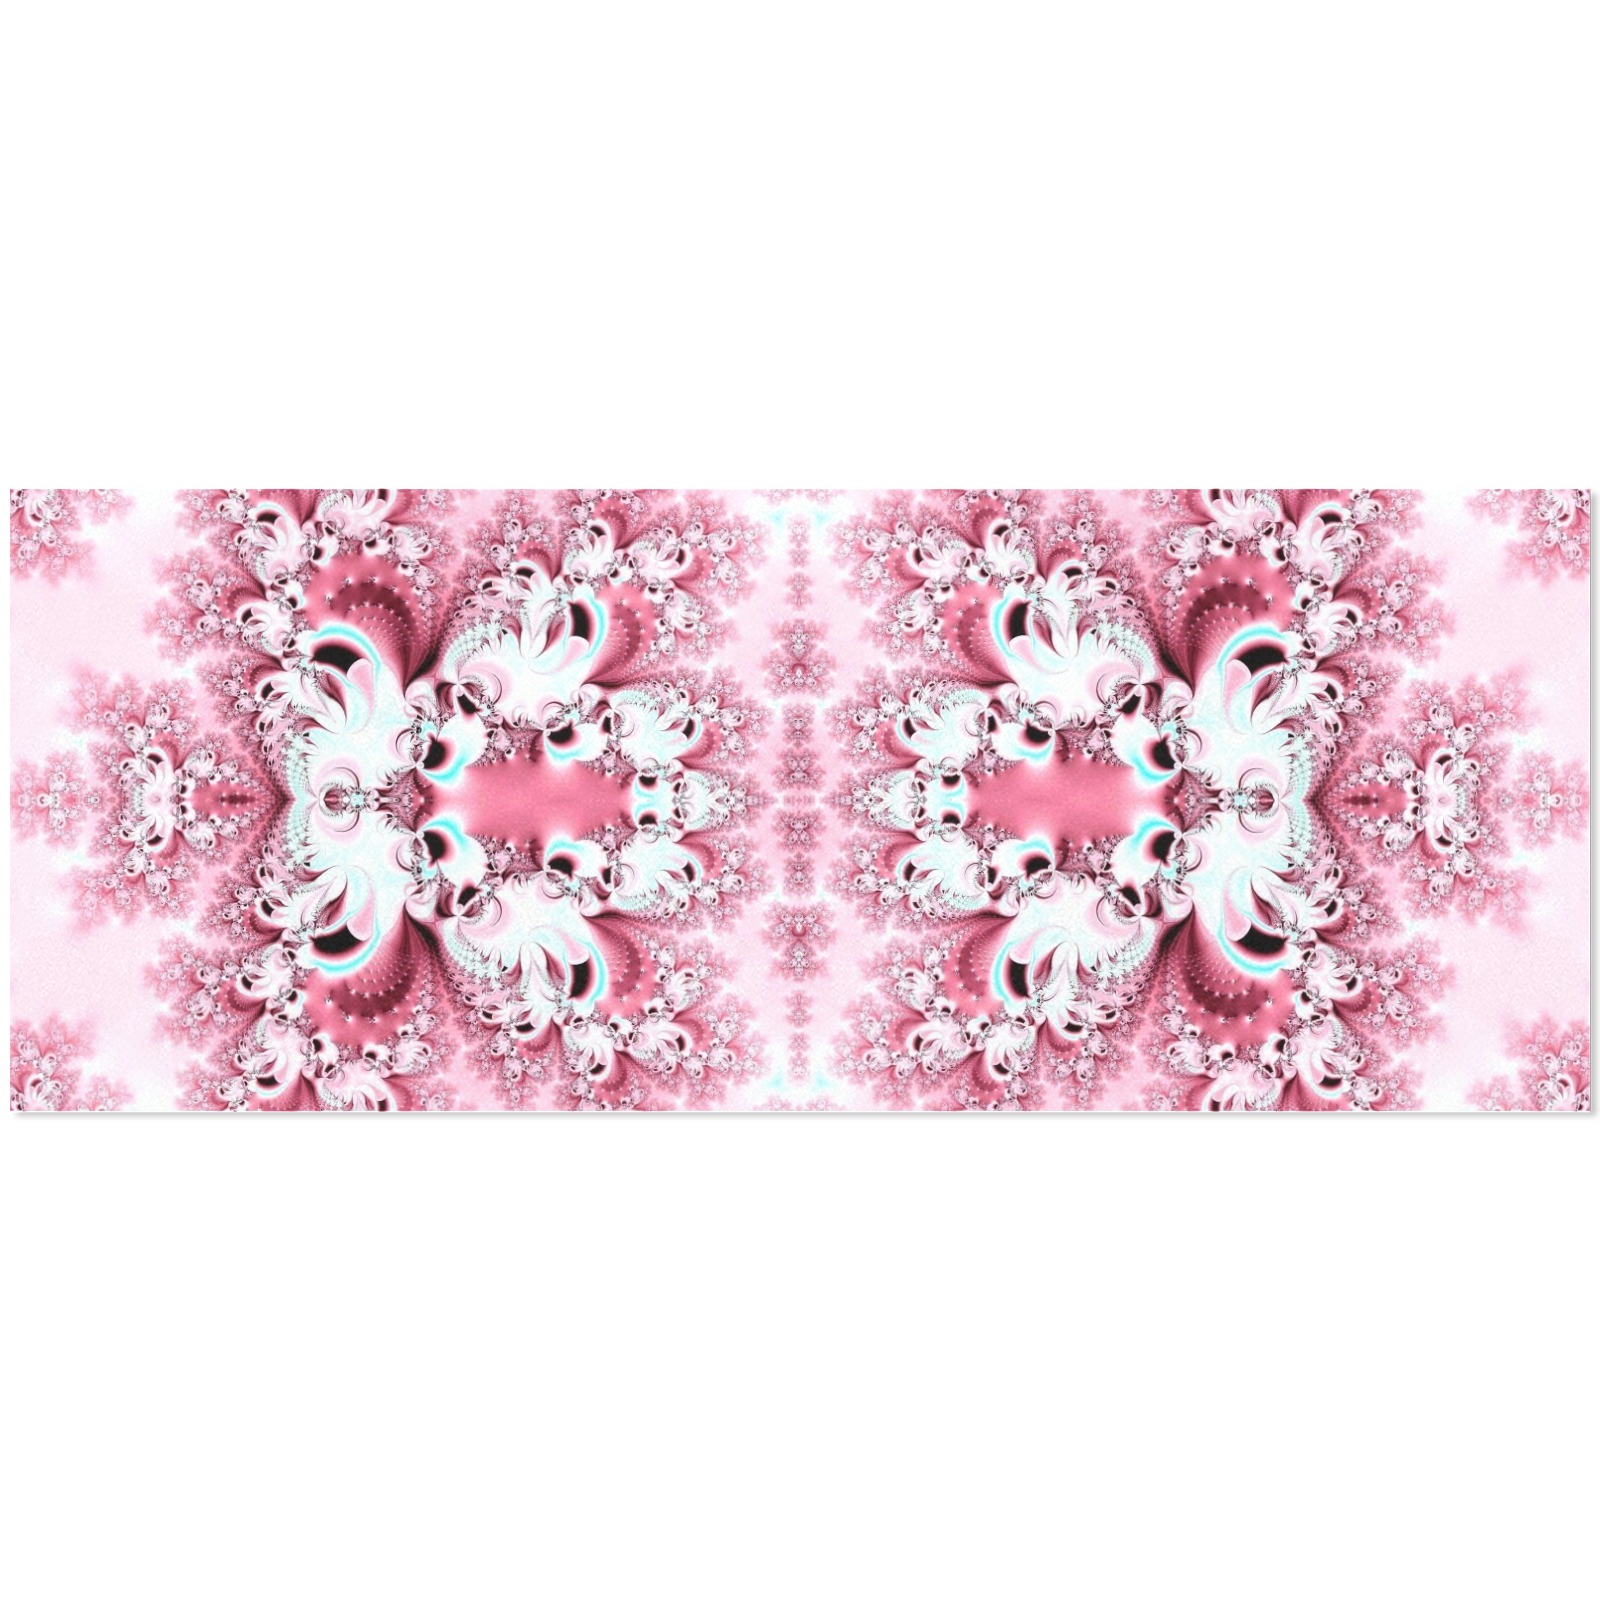 Pink Rose Garden Frost Fractal Gift Wrapping Paper 58"x 23" (2 Rolls)